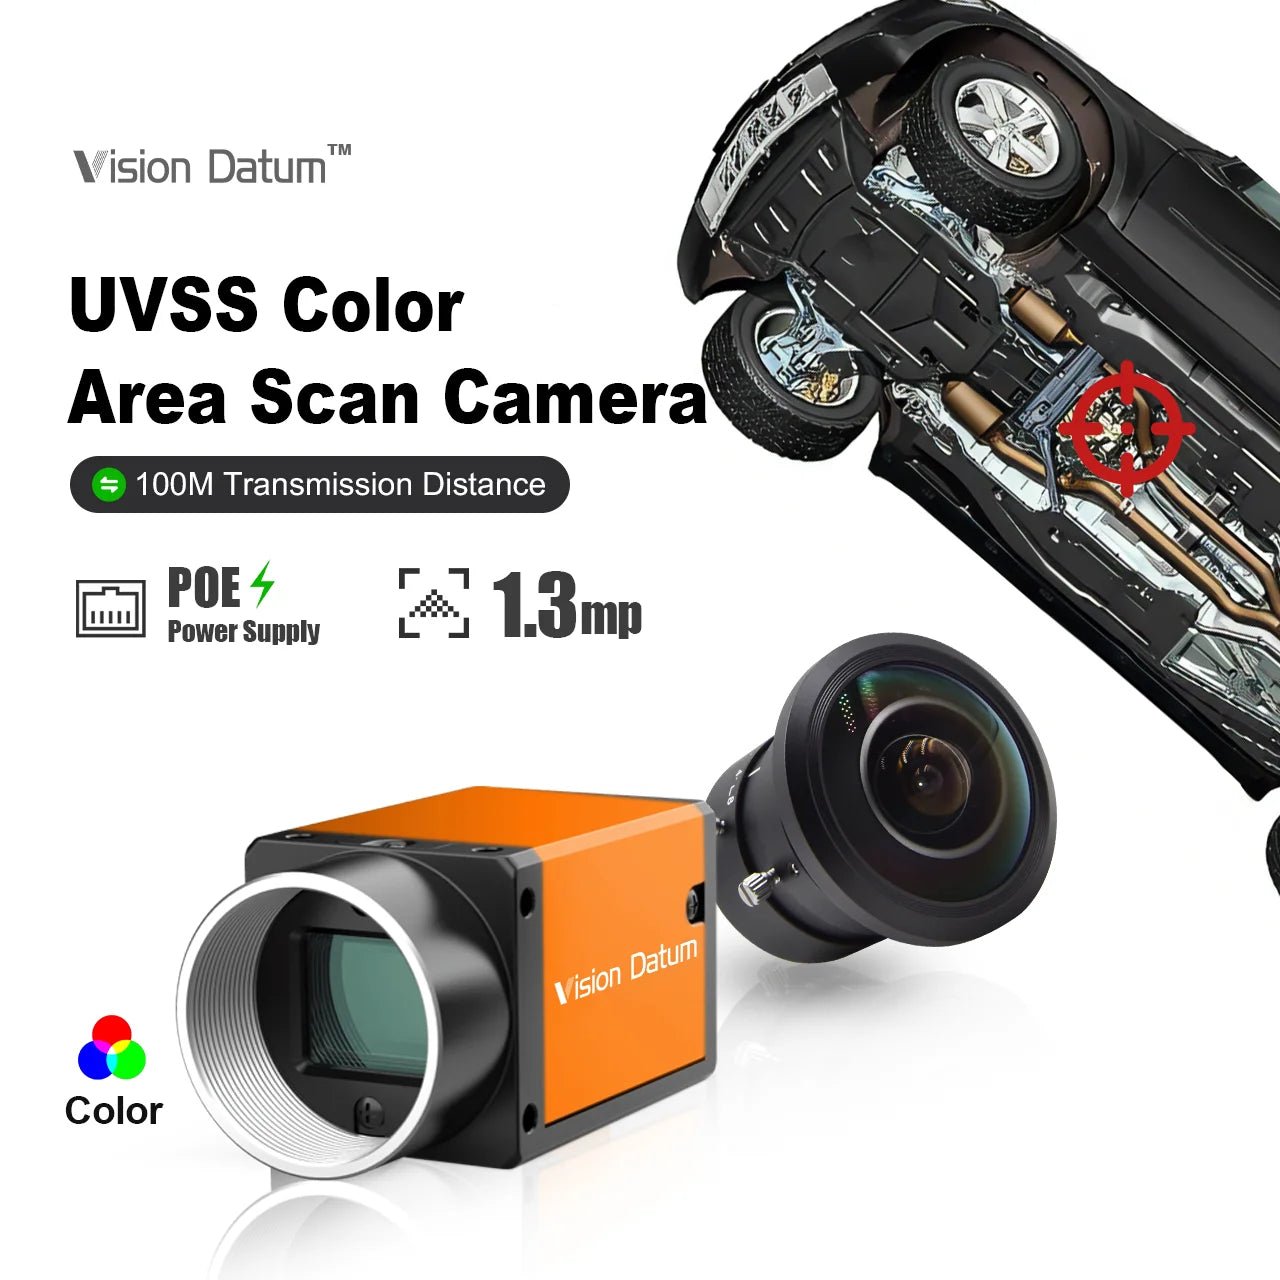 1.3MP UVSS Integration Area Scanning Under Vehicle Security inspection Camera with Large FOV Lens - Vision Datum